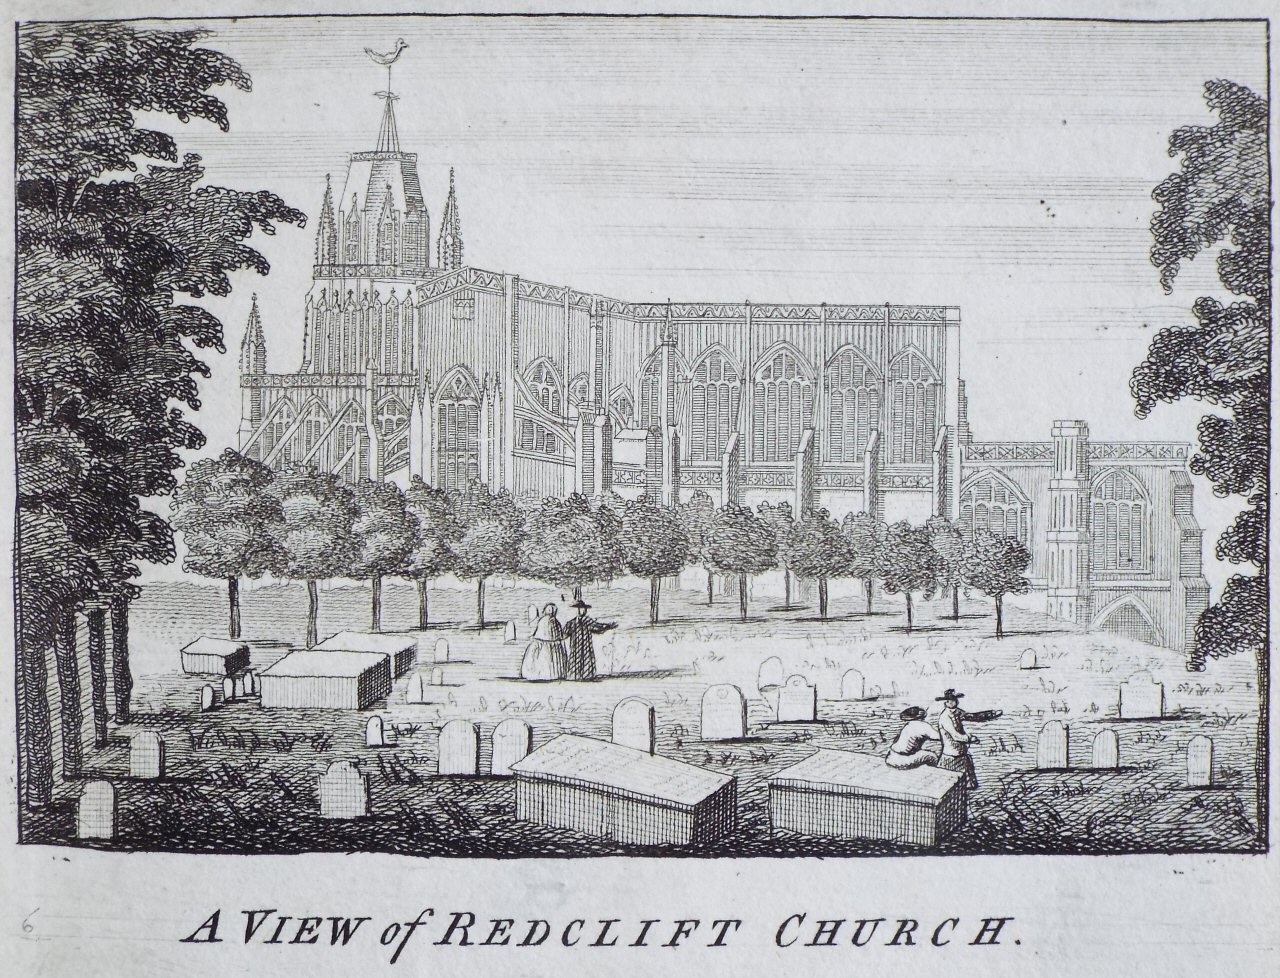 Print - A View of Redclift Church.